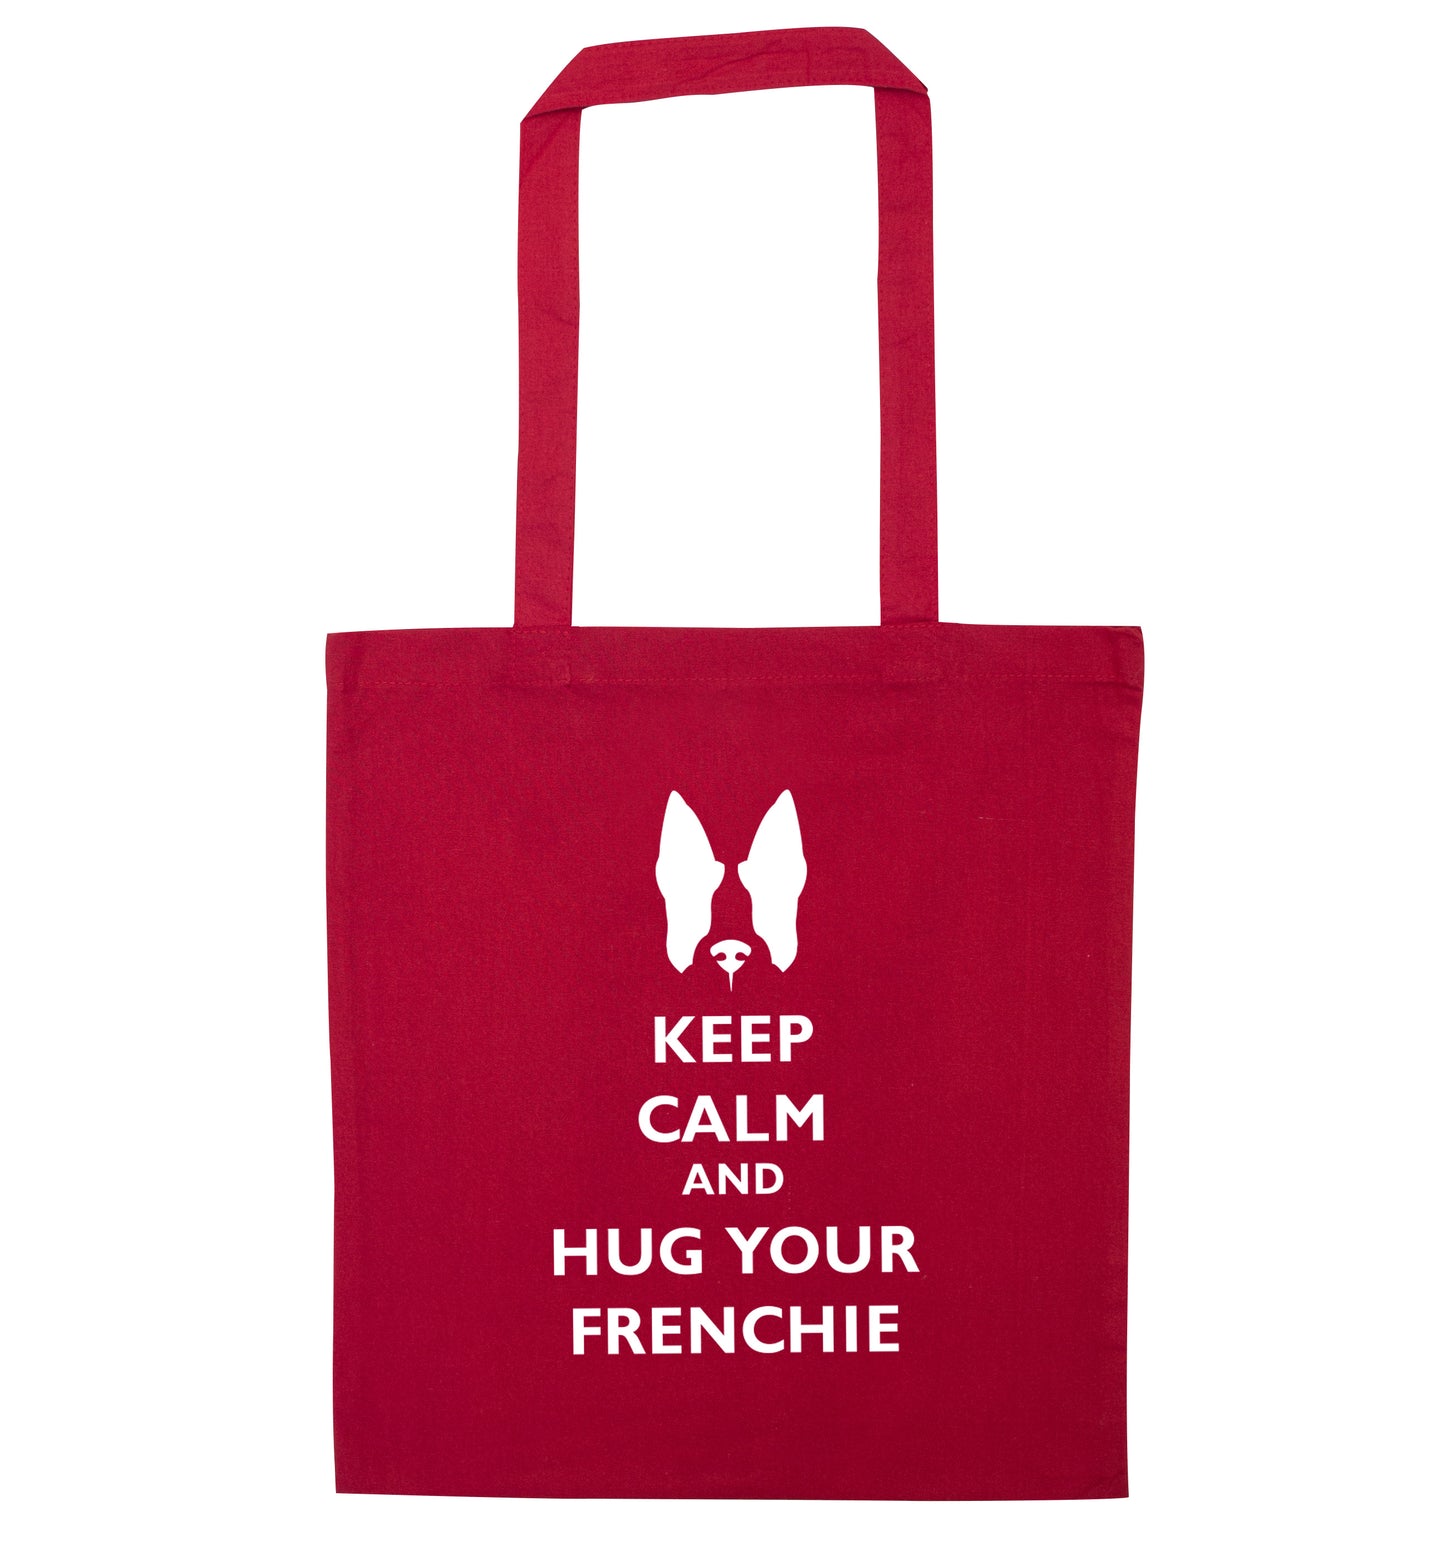 Keep calm and hug your frenchie red tote bag